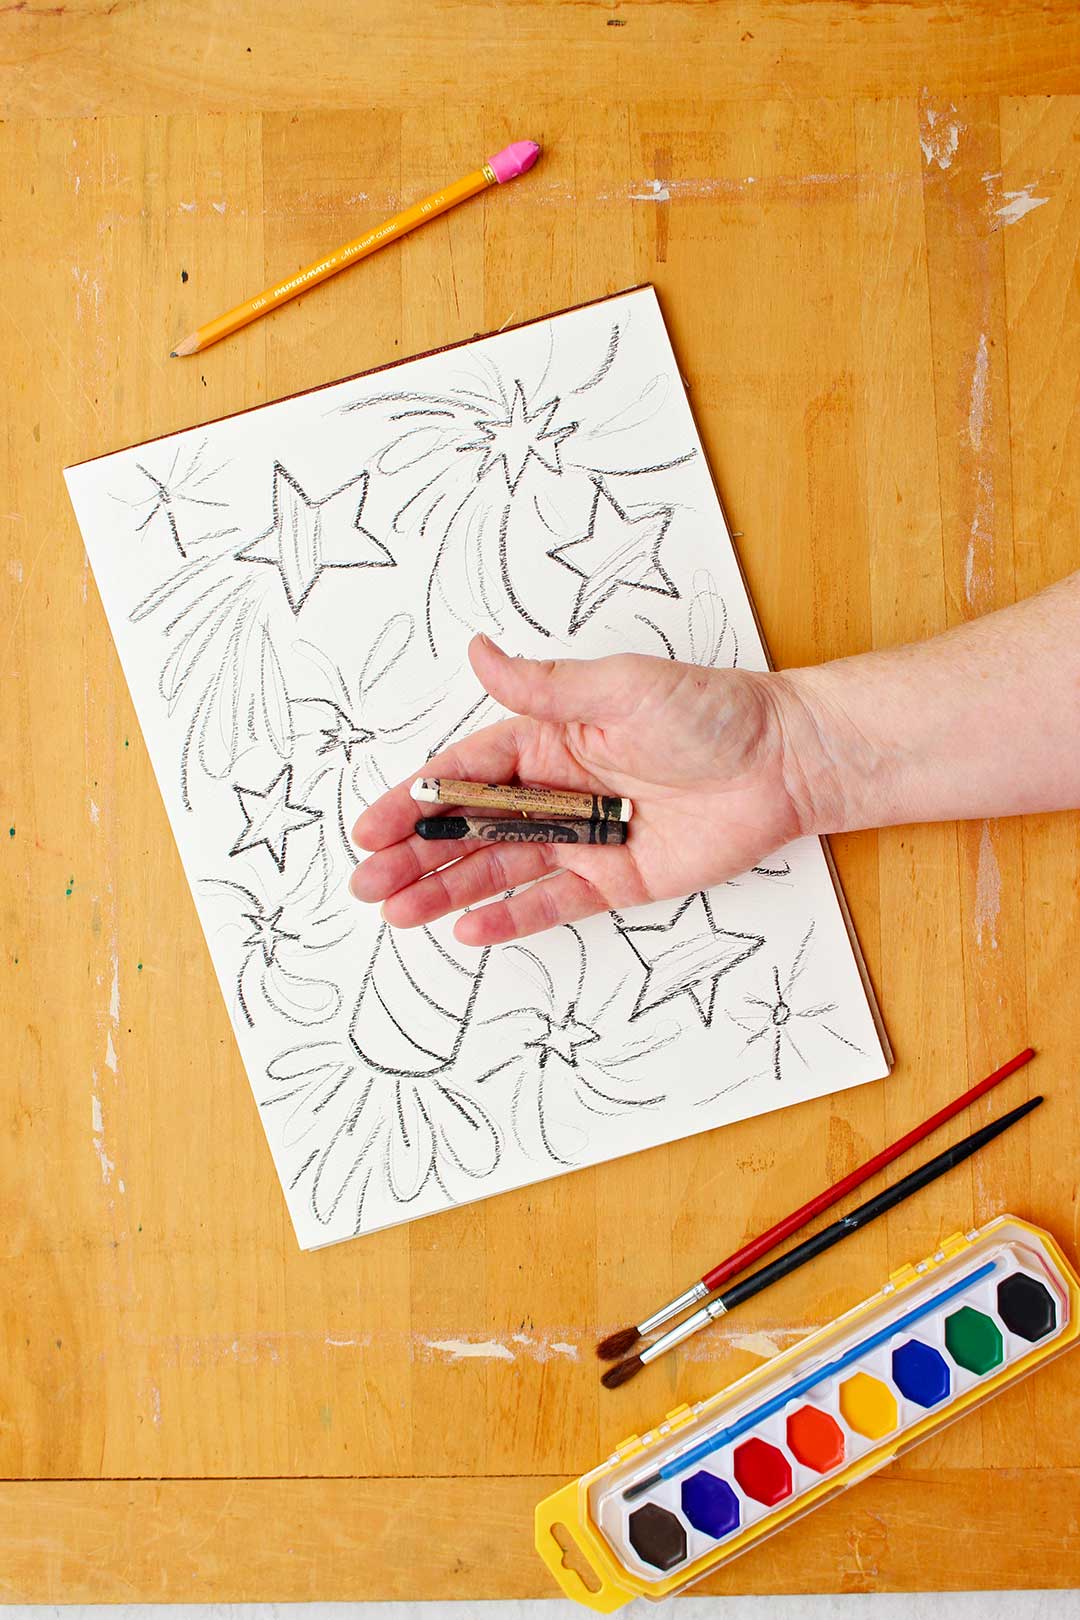 Hand holding a white and black crayon above a drawing of stars and rockets.